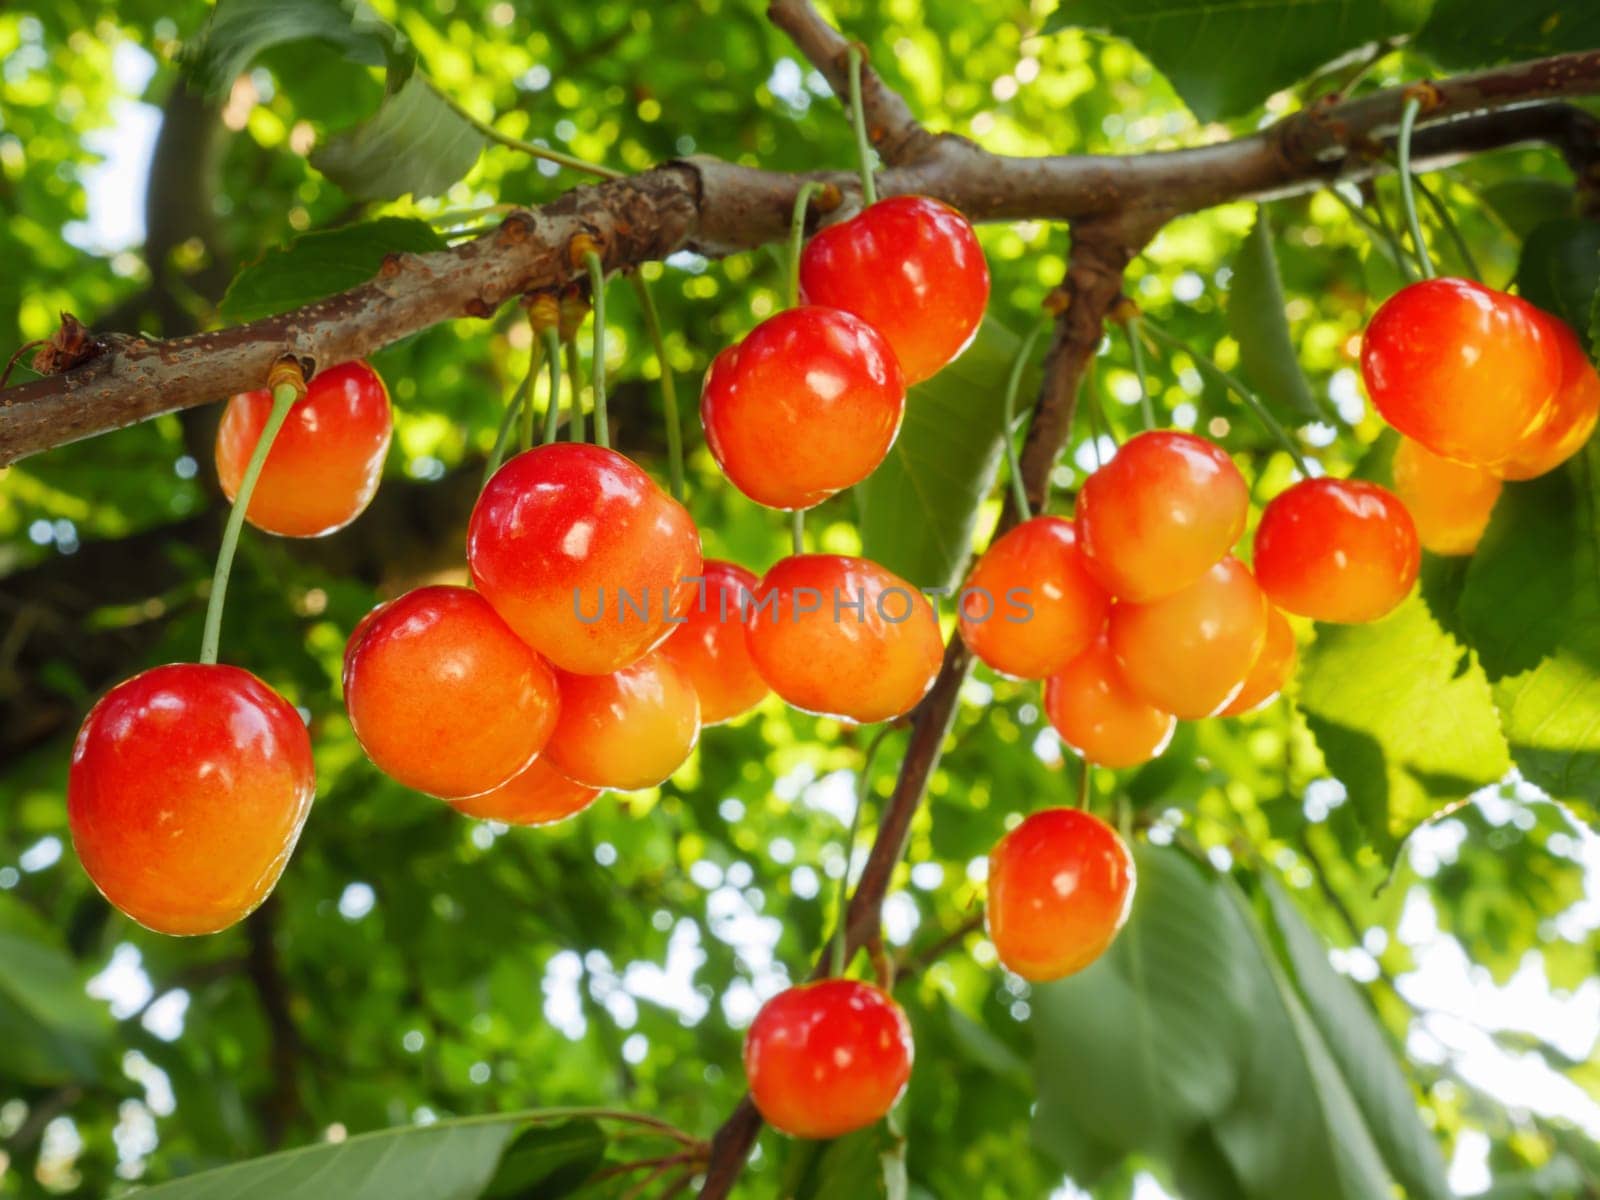 Rainier cherry harvest garden growing fruit branch sweet cherry hanging berry tree. Ripe sweet cherry tree branch bunch cherry harvest season. Harvesting fruit tree garden fruit farm harvest concept by synel